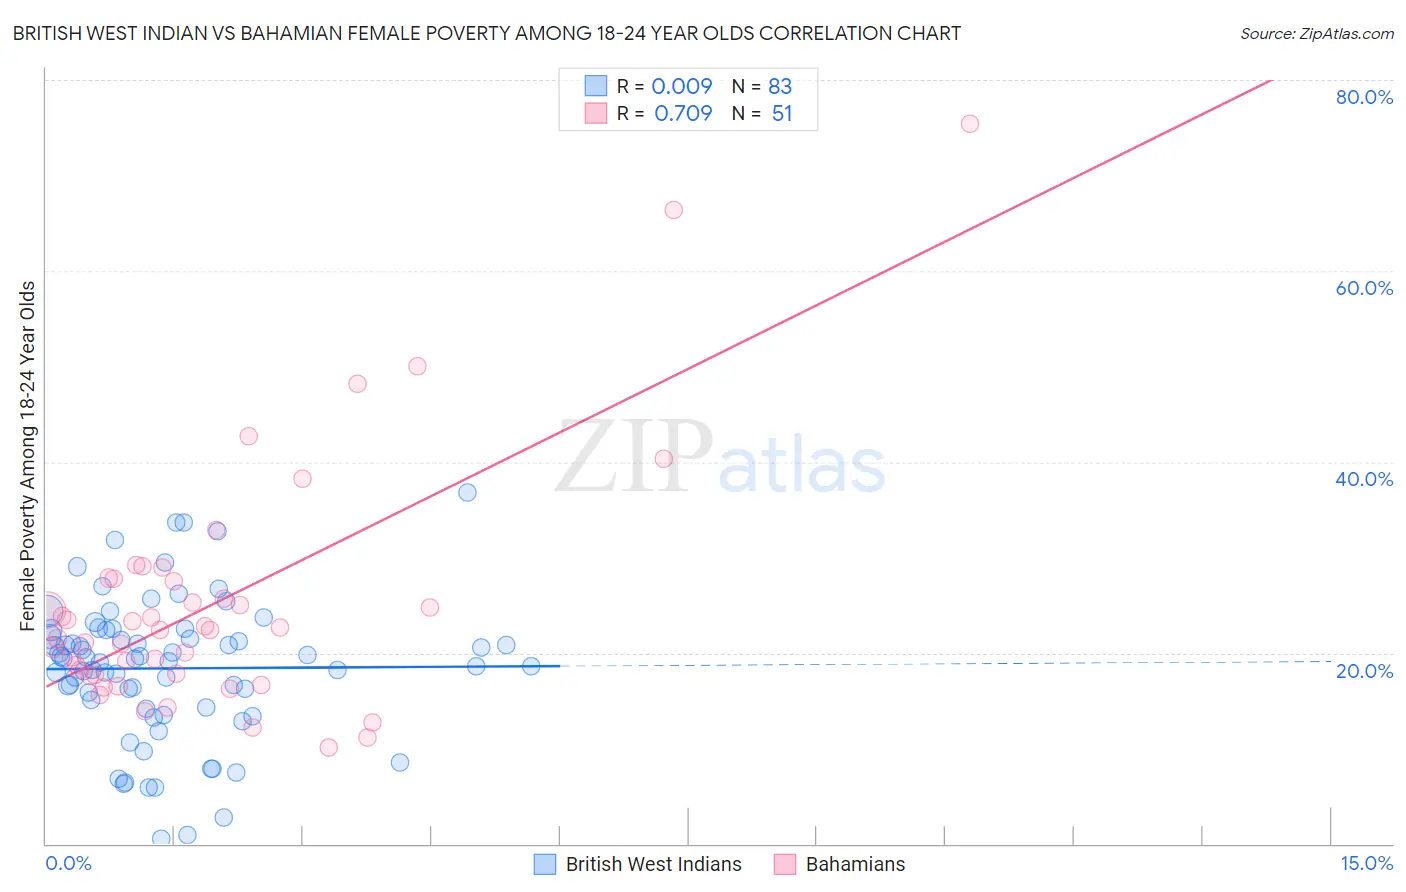 British West Indian vs Bahamian Female Poverty Among 18-24 Year Olds